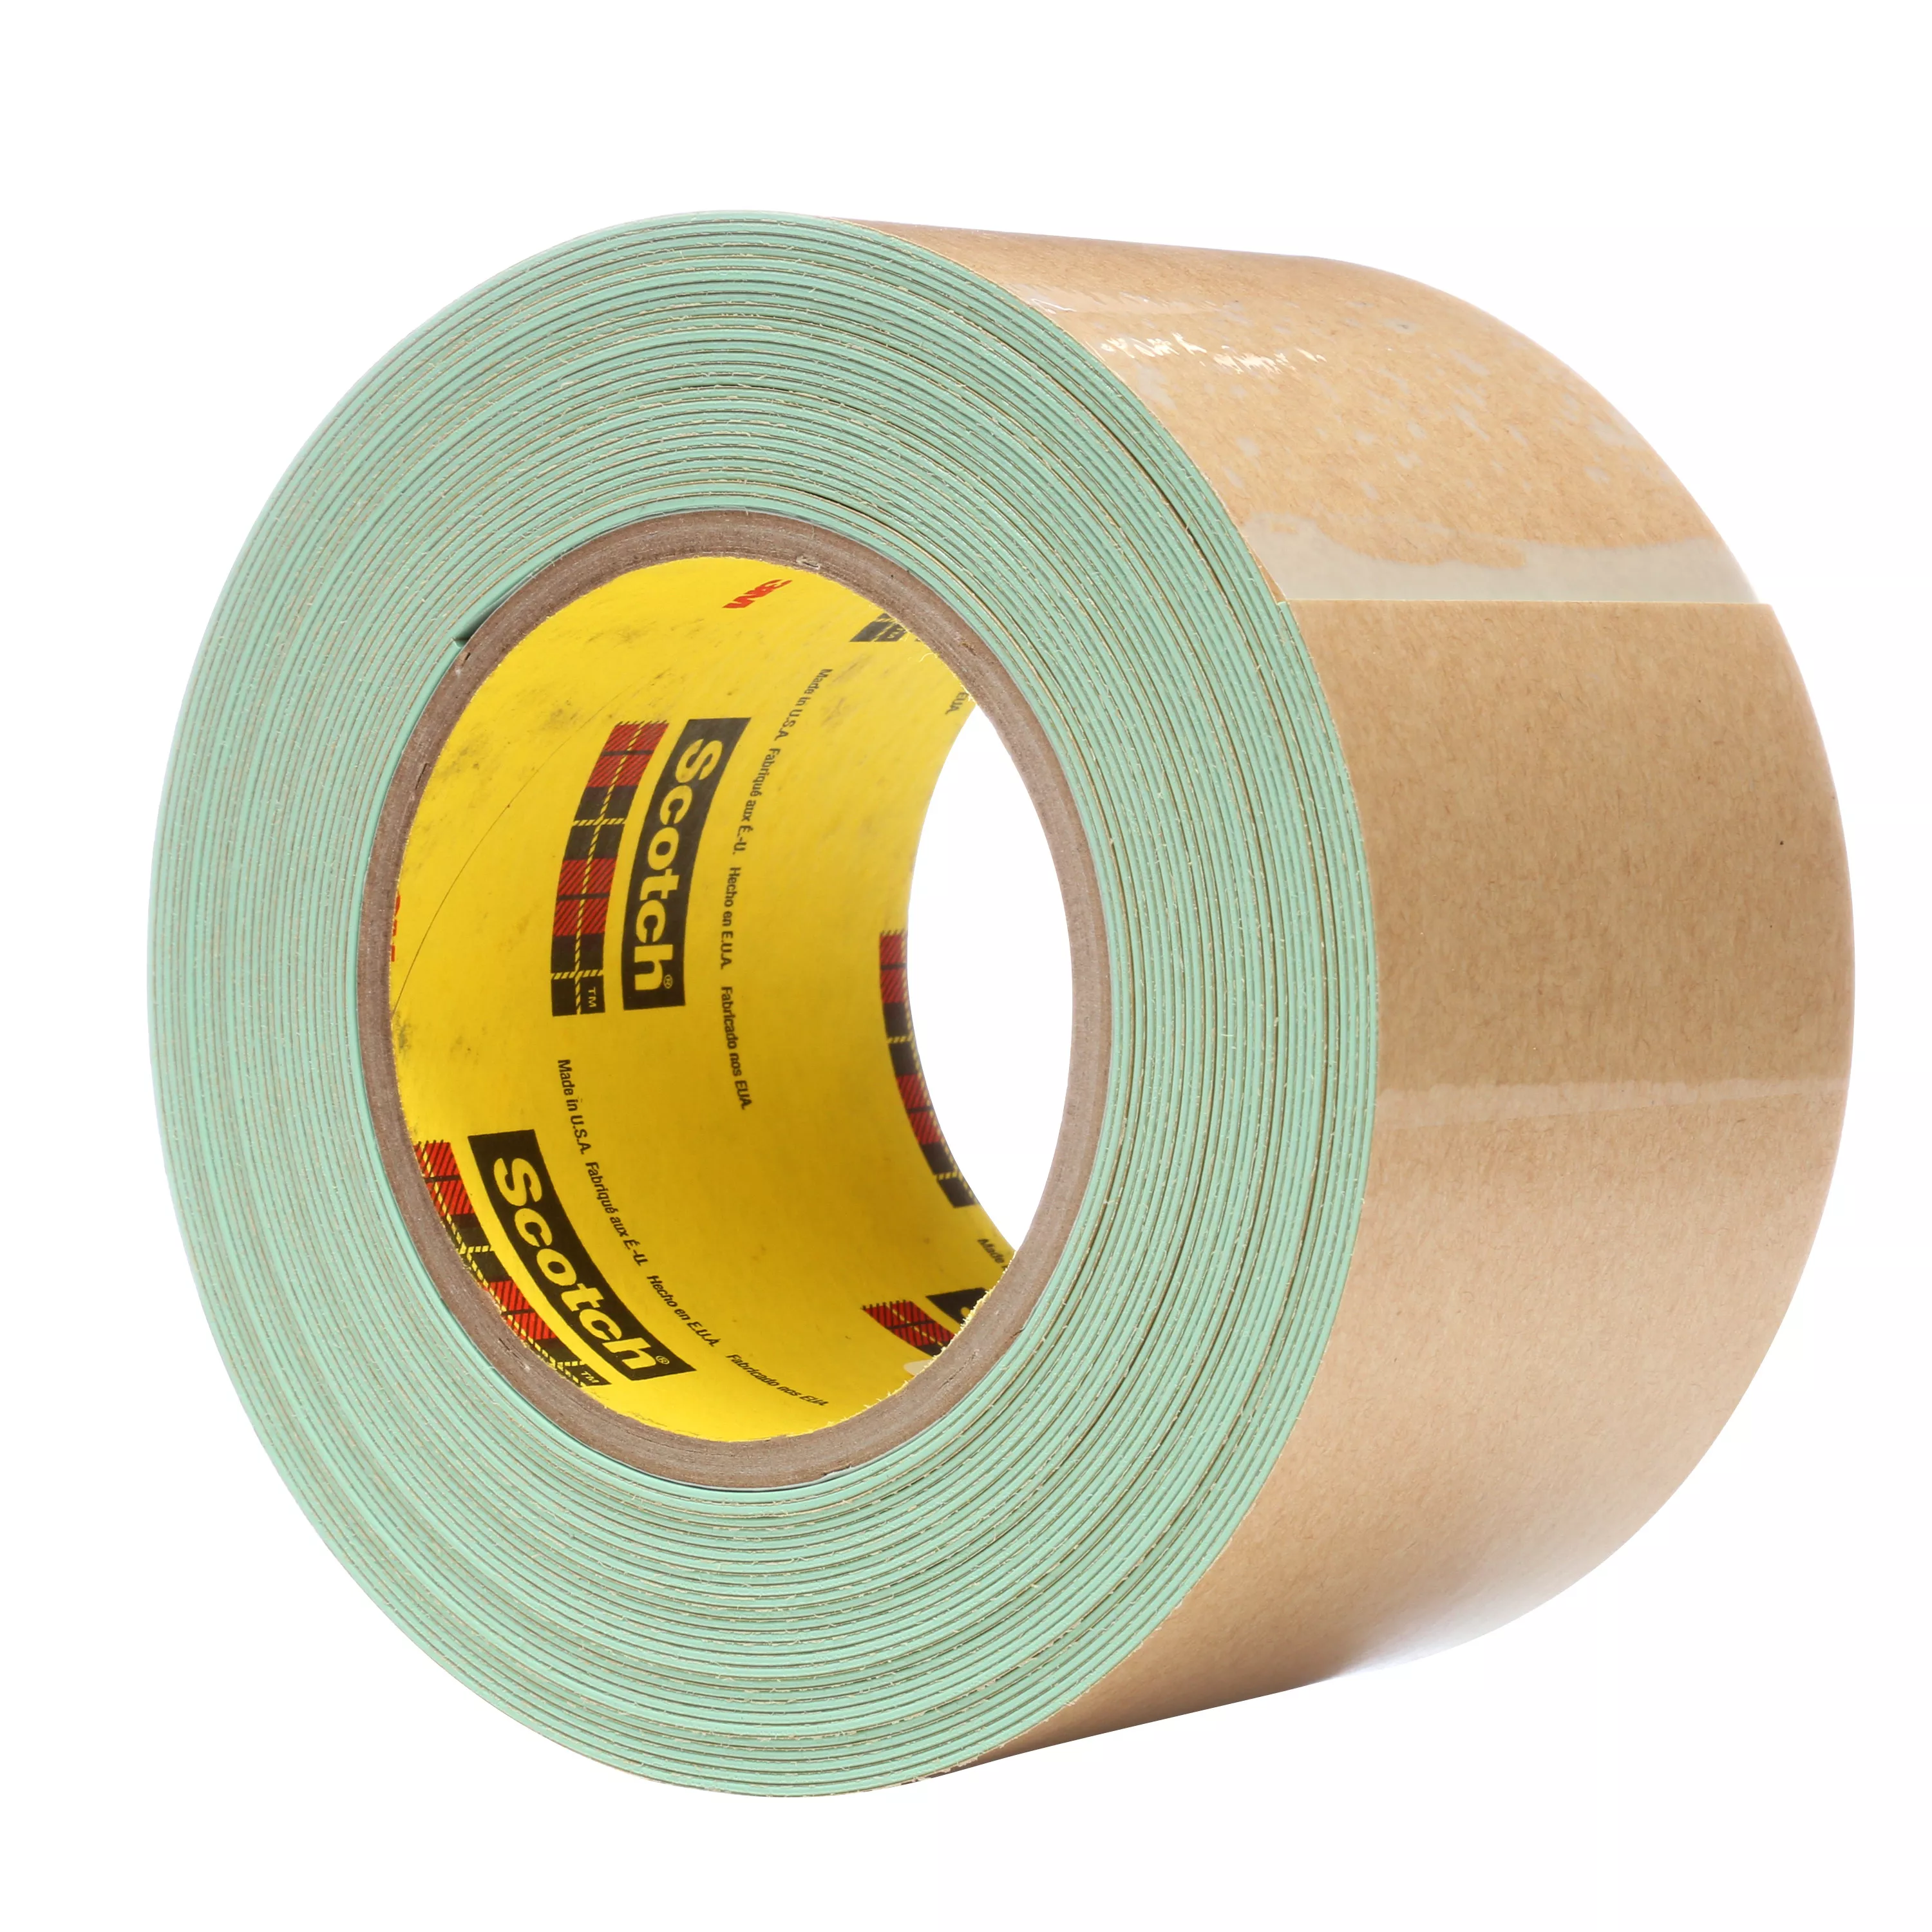 Product Number 500 | 3M™ Impact Stripping Tape 500